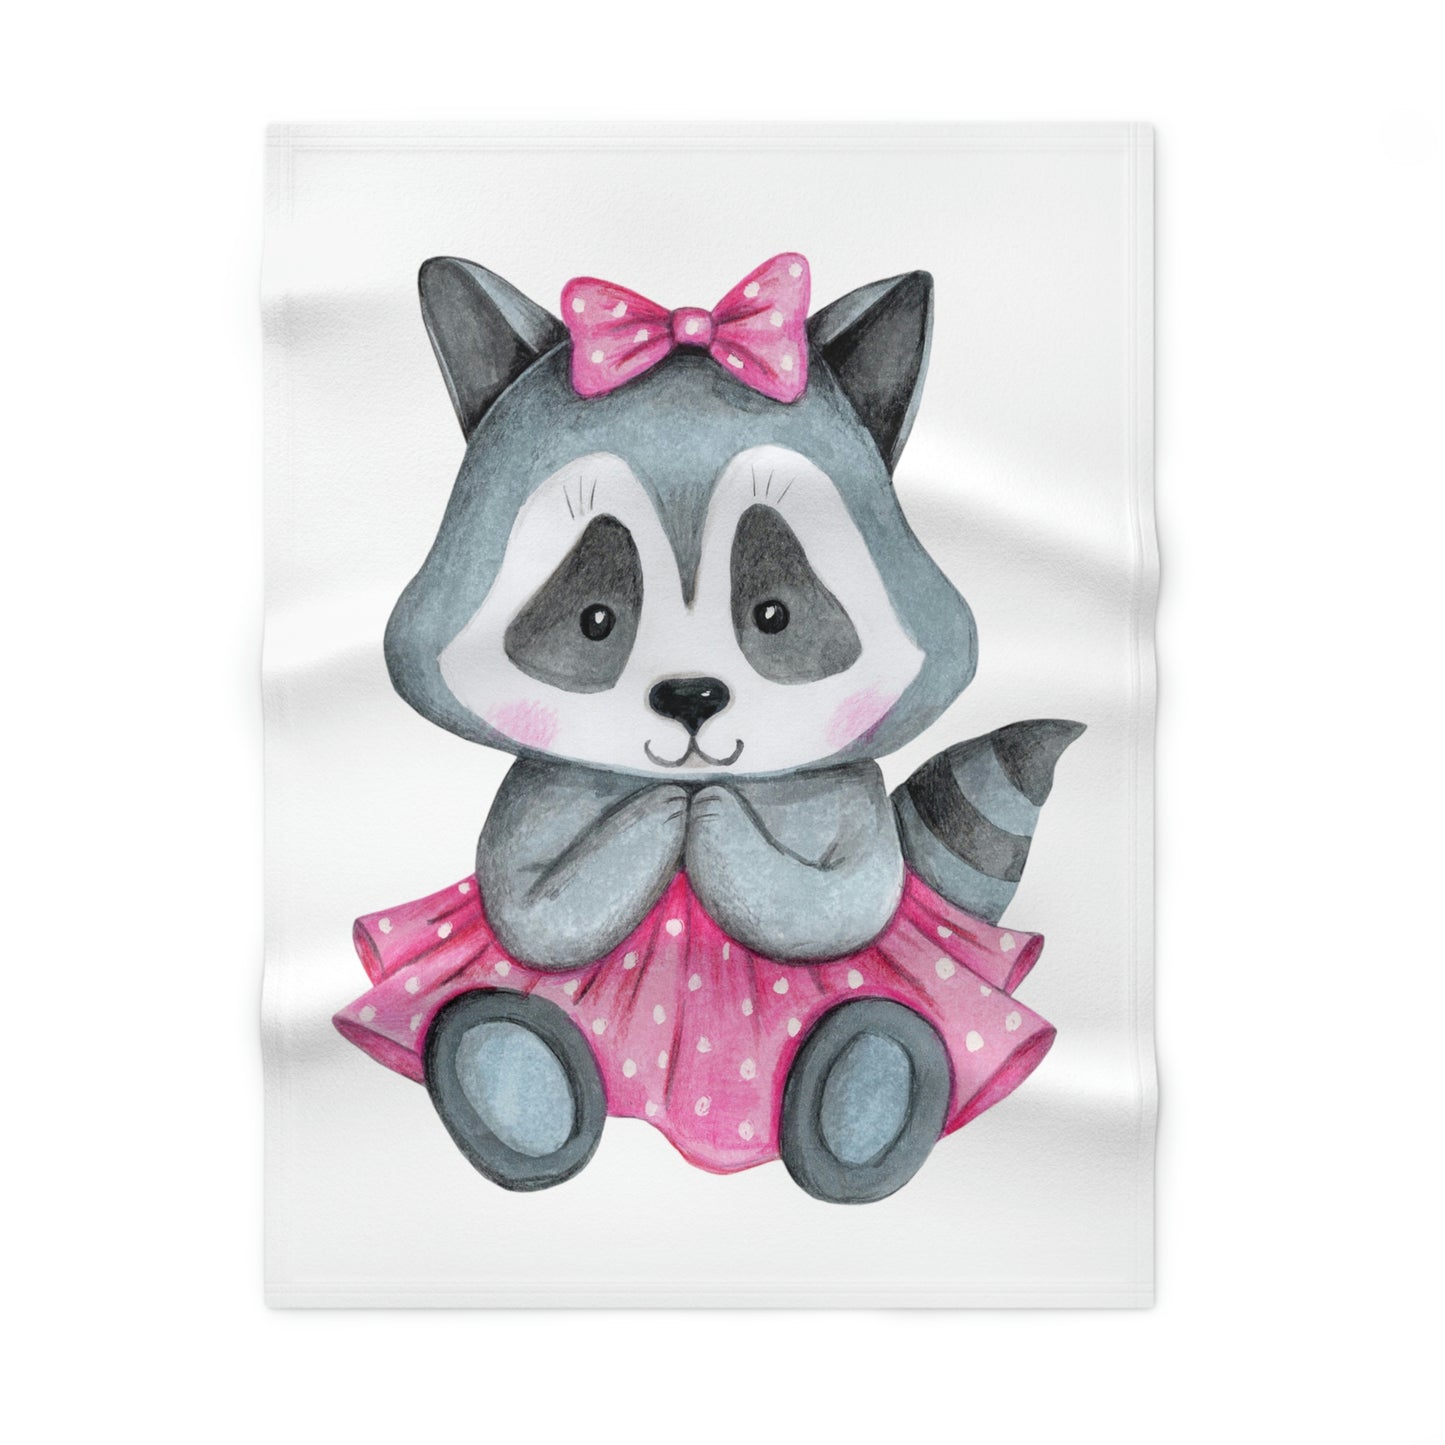 "Pretty in Pink" Kids Blanket - Weave Got Gifts - Unique Gifts You Won’t Find Anywhere Else!